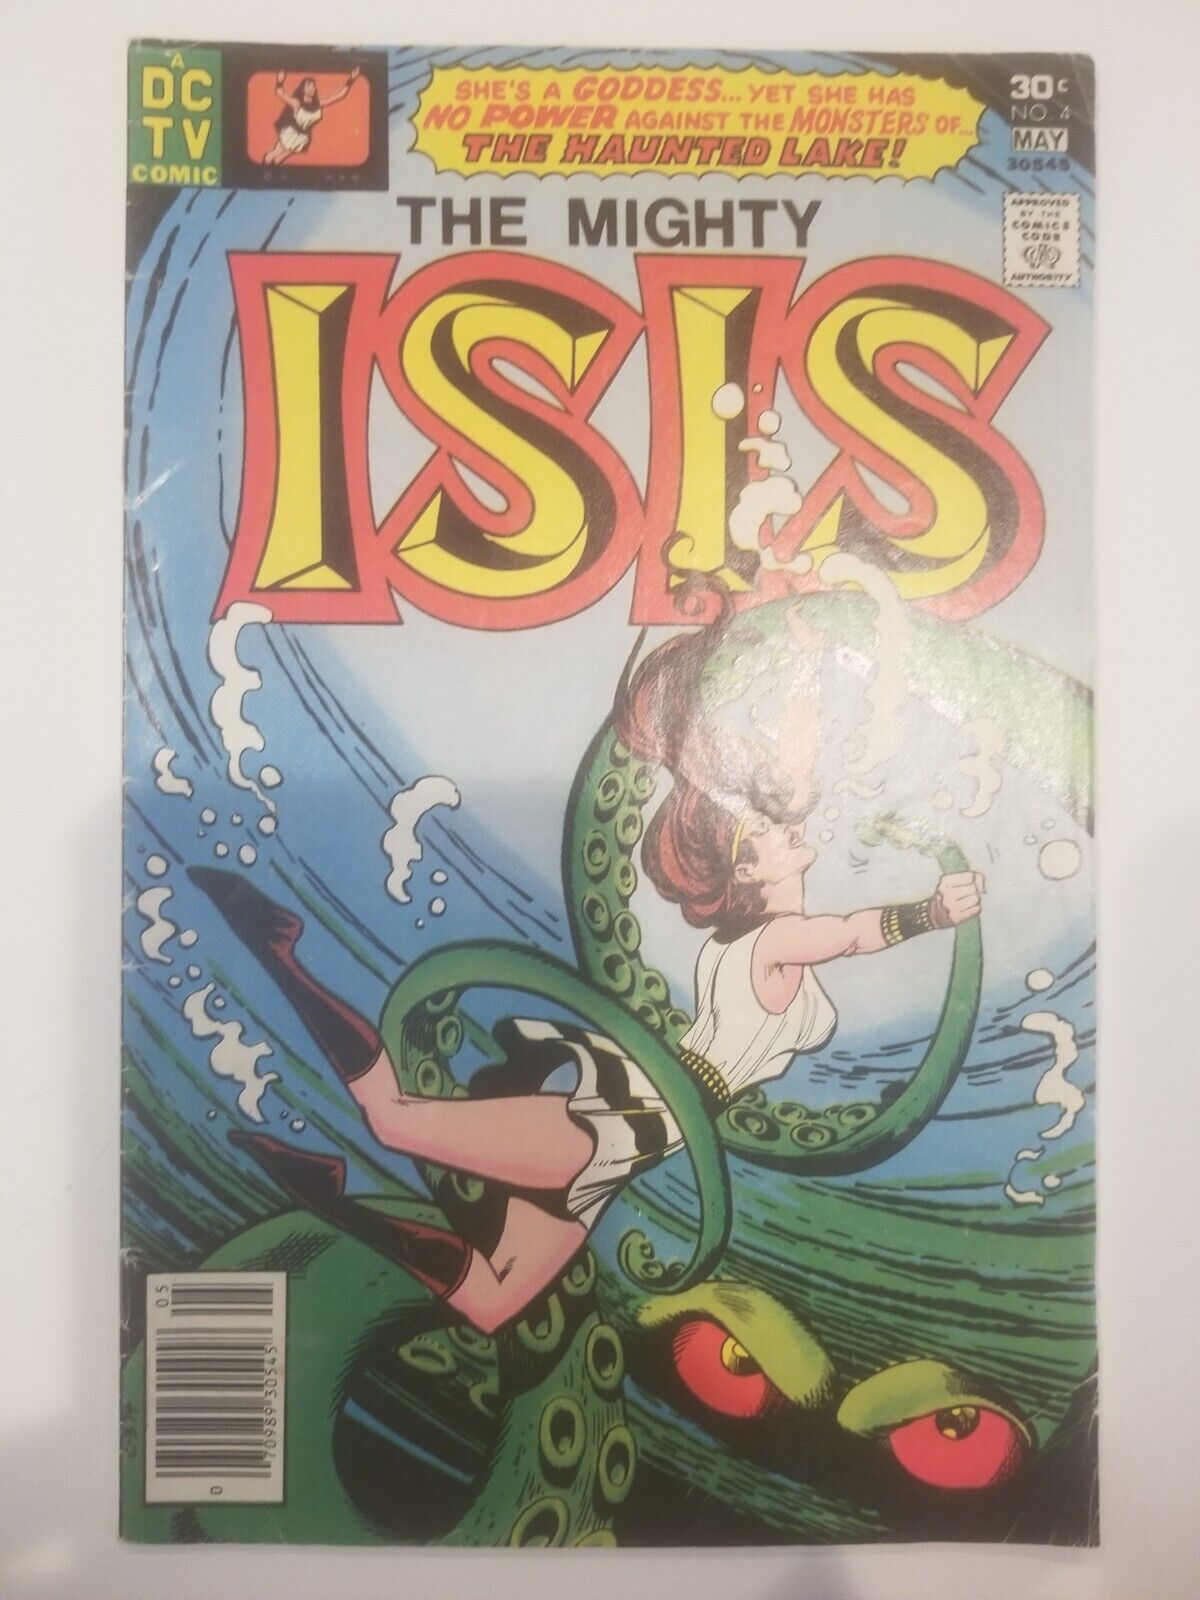  The Mighty ISIS #4 DC TV (1977) Bronze Age Comic Saturday Morning Show.